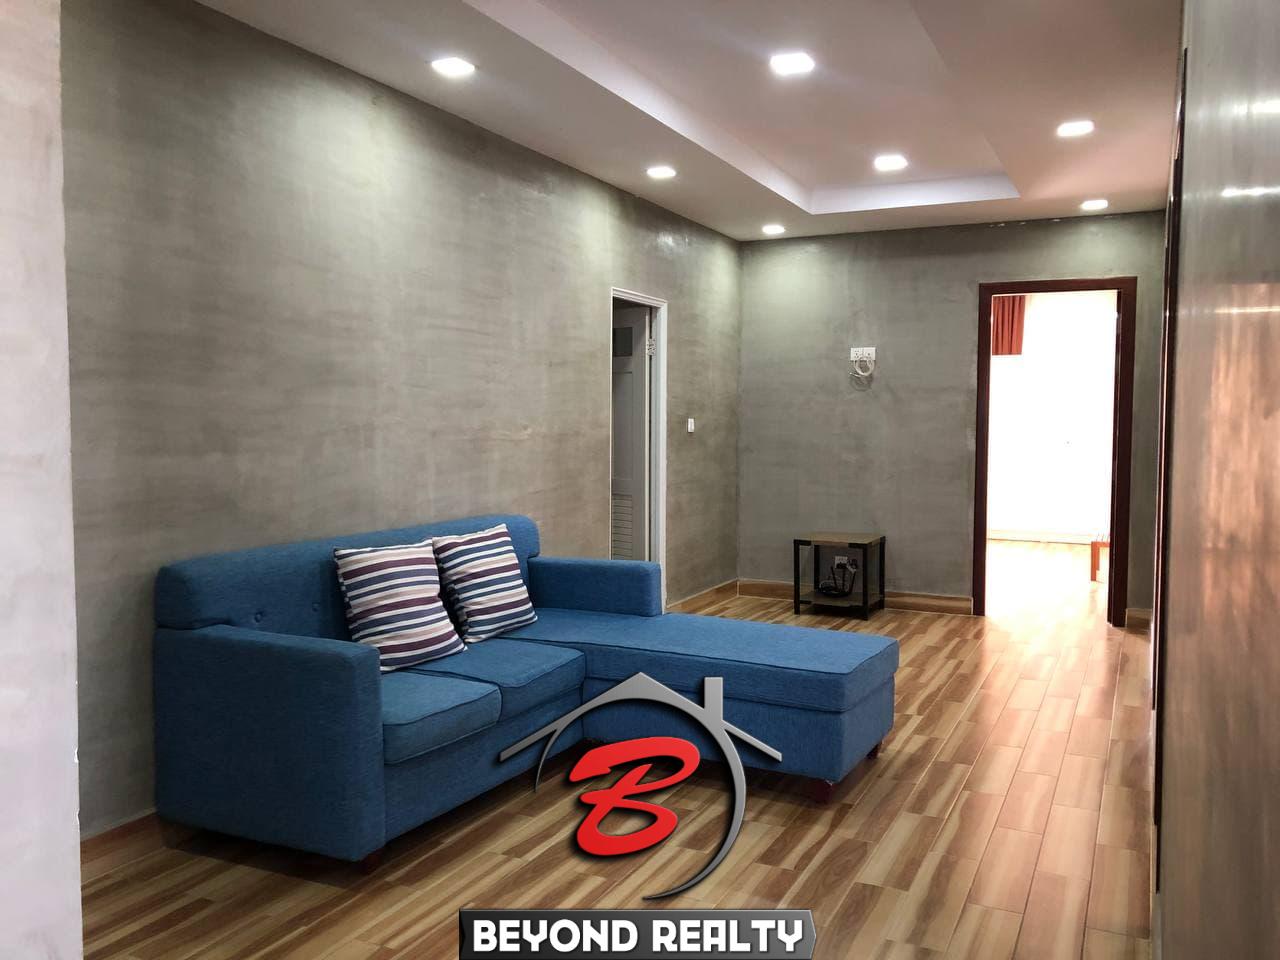 the living room of the 3-bedroom penthouse serviced apartment for rent in Tonle Bassac Phnom Penh Cambodia